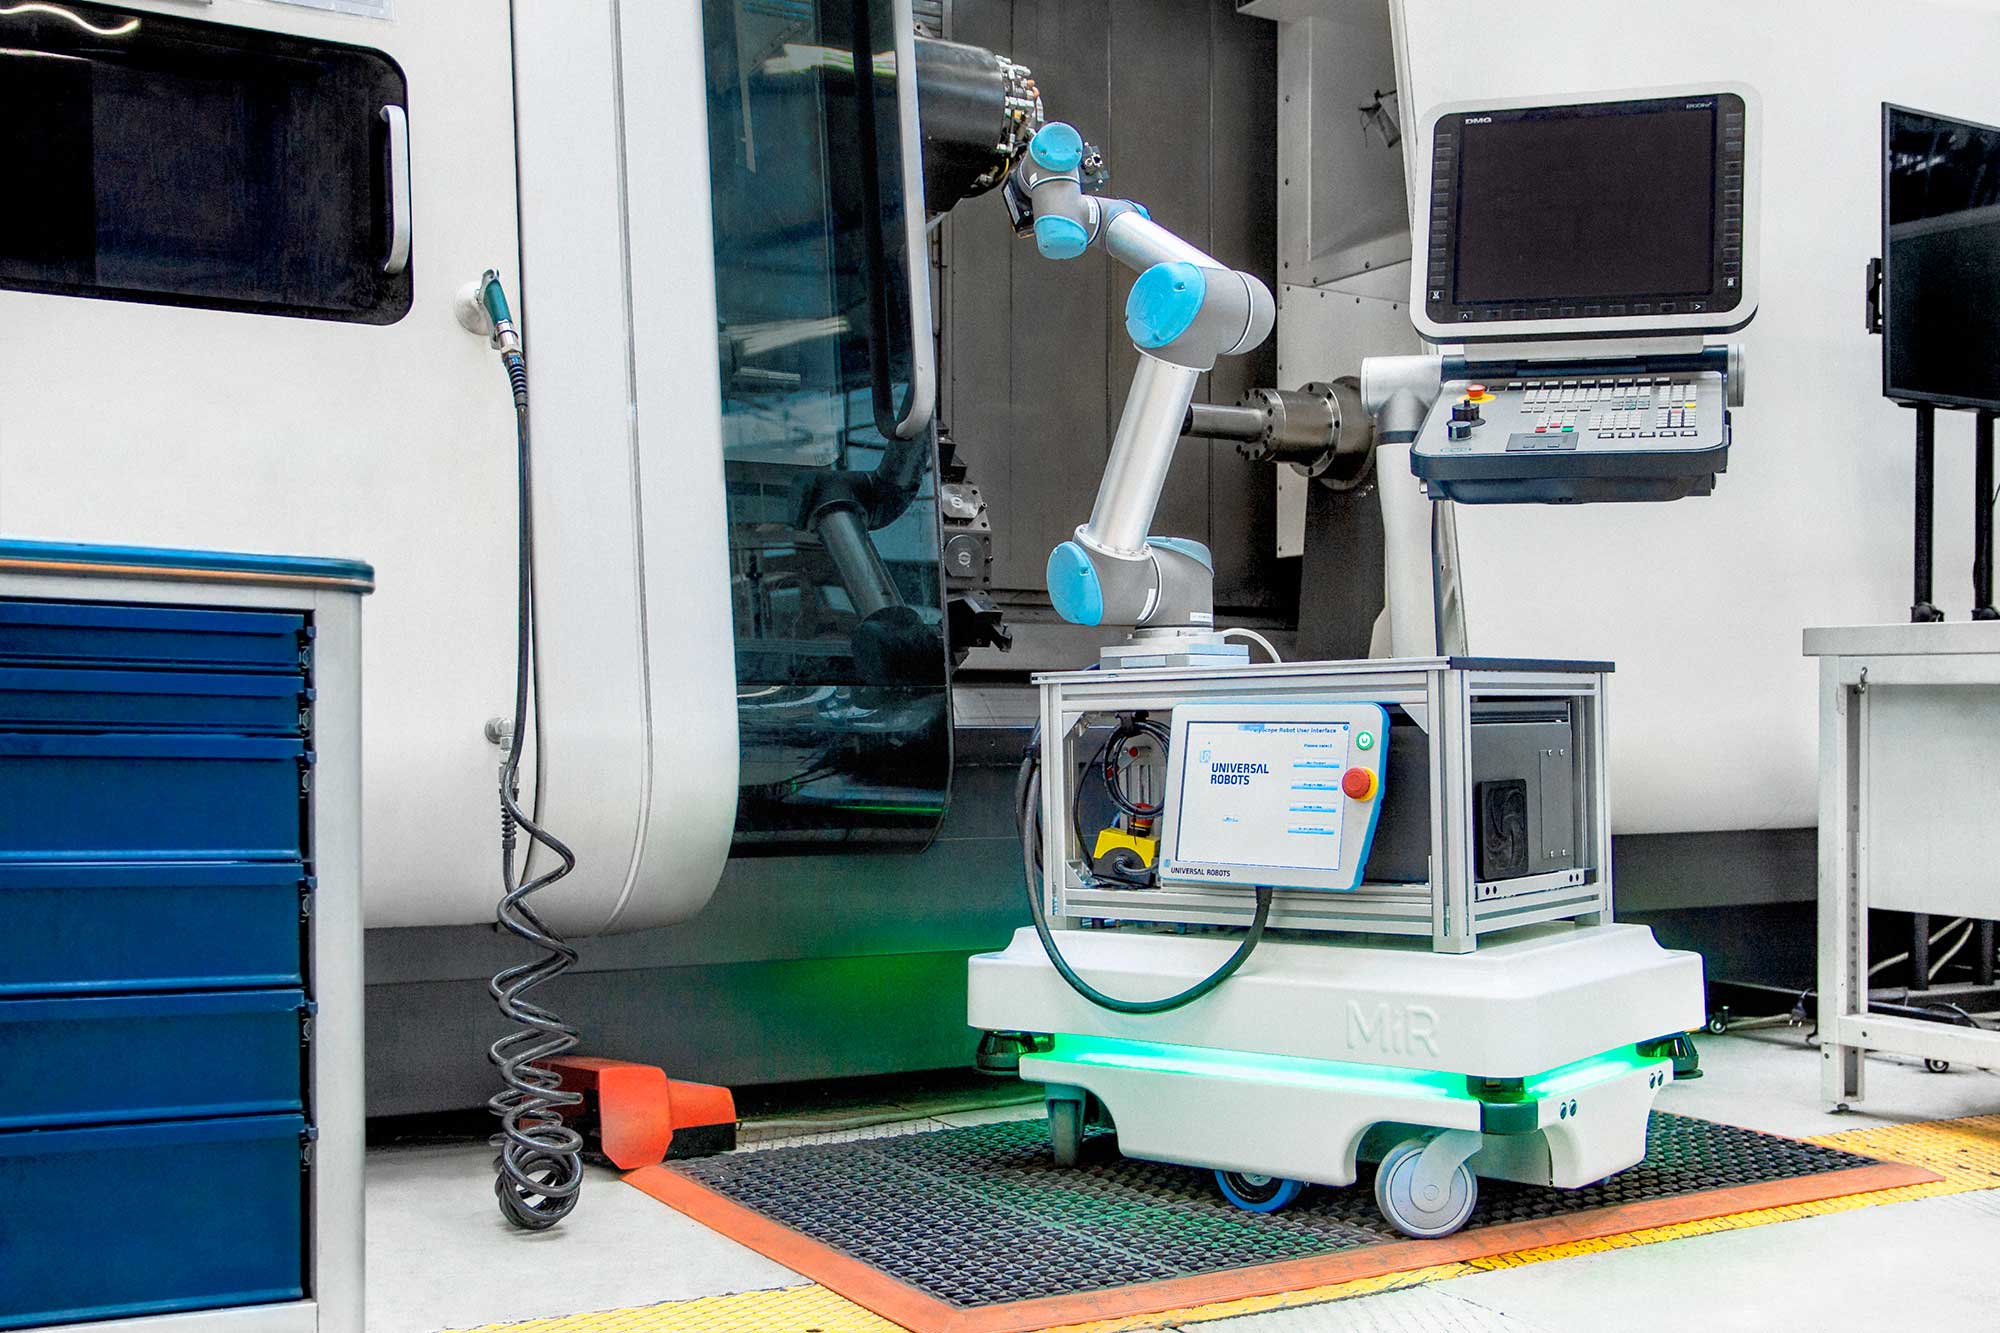 The Tend-O-Bot demonstrator can load machine tools fully automatically.